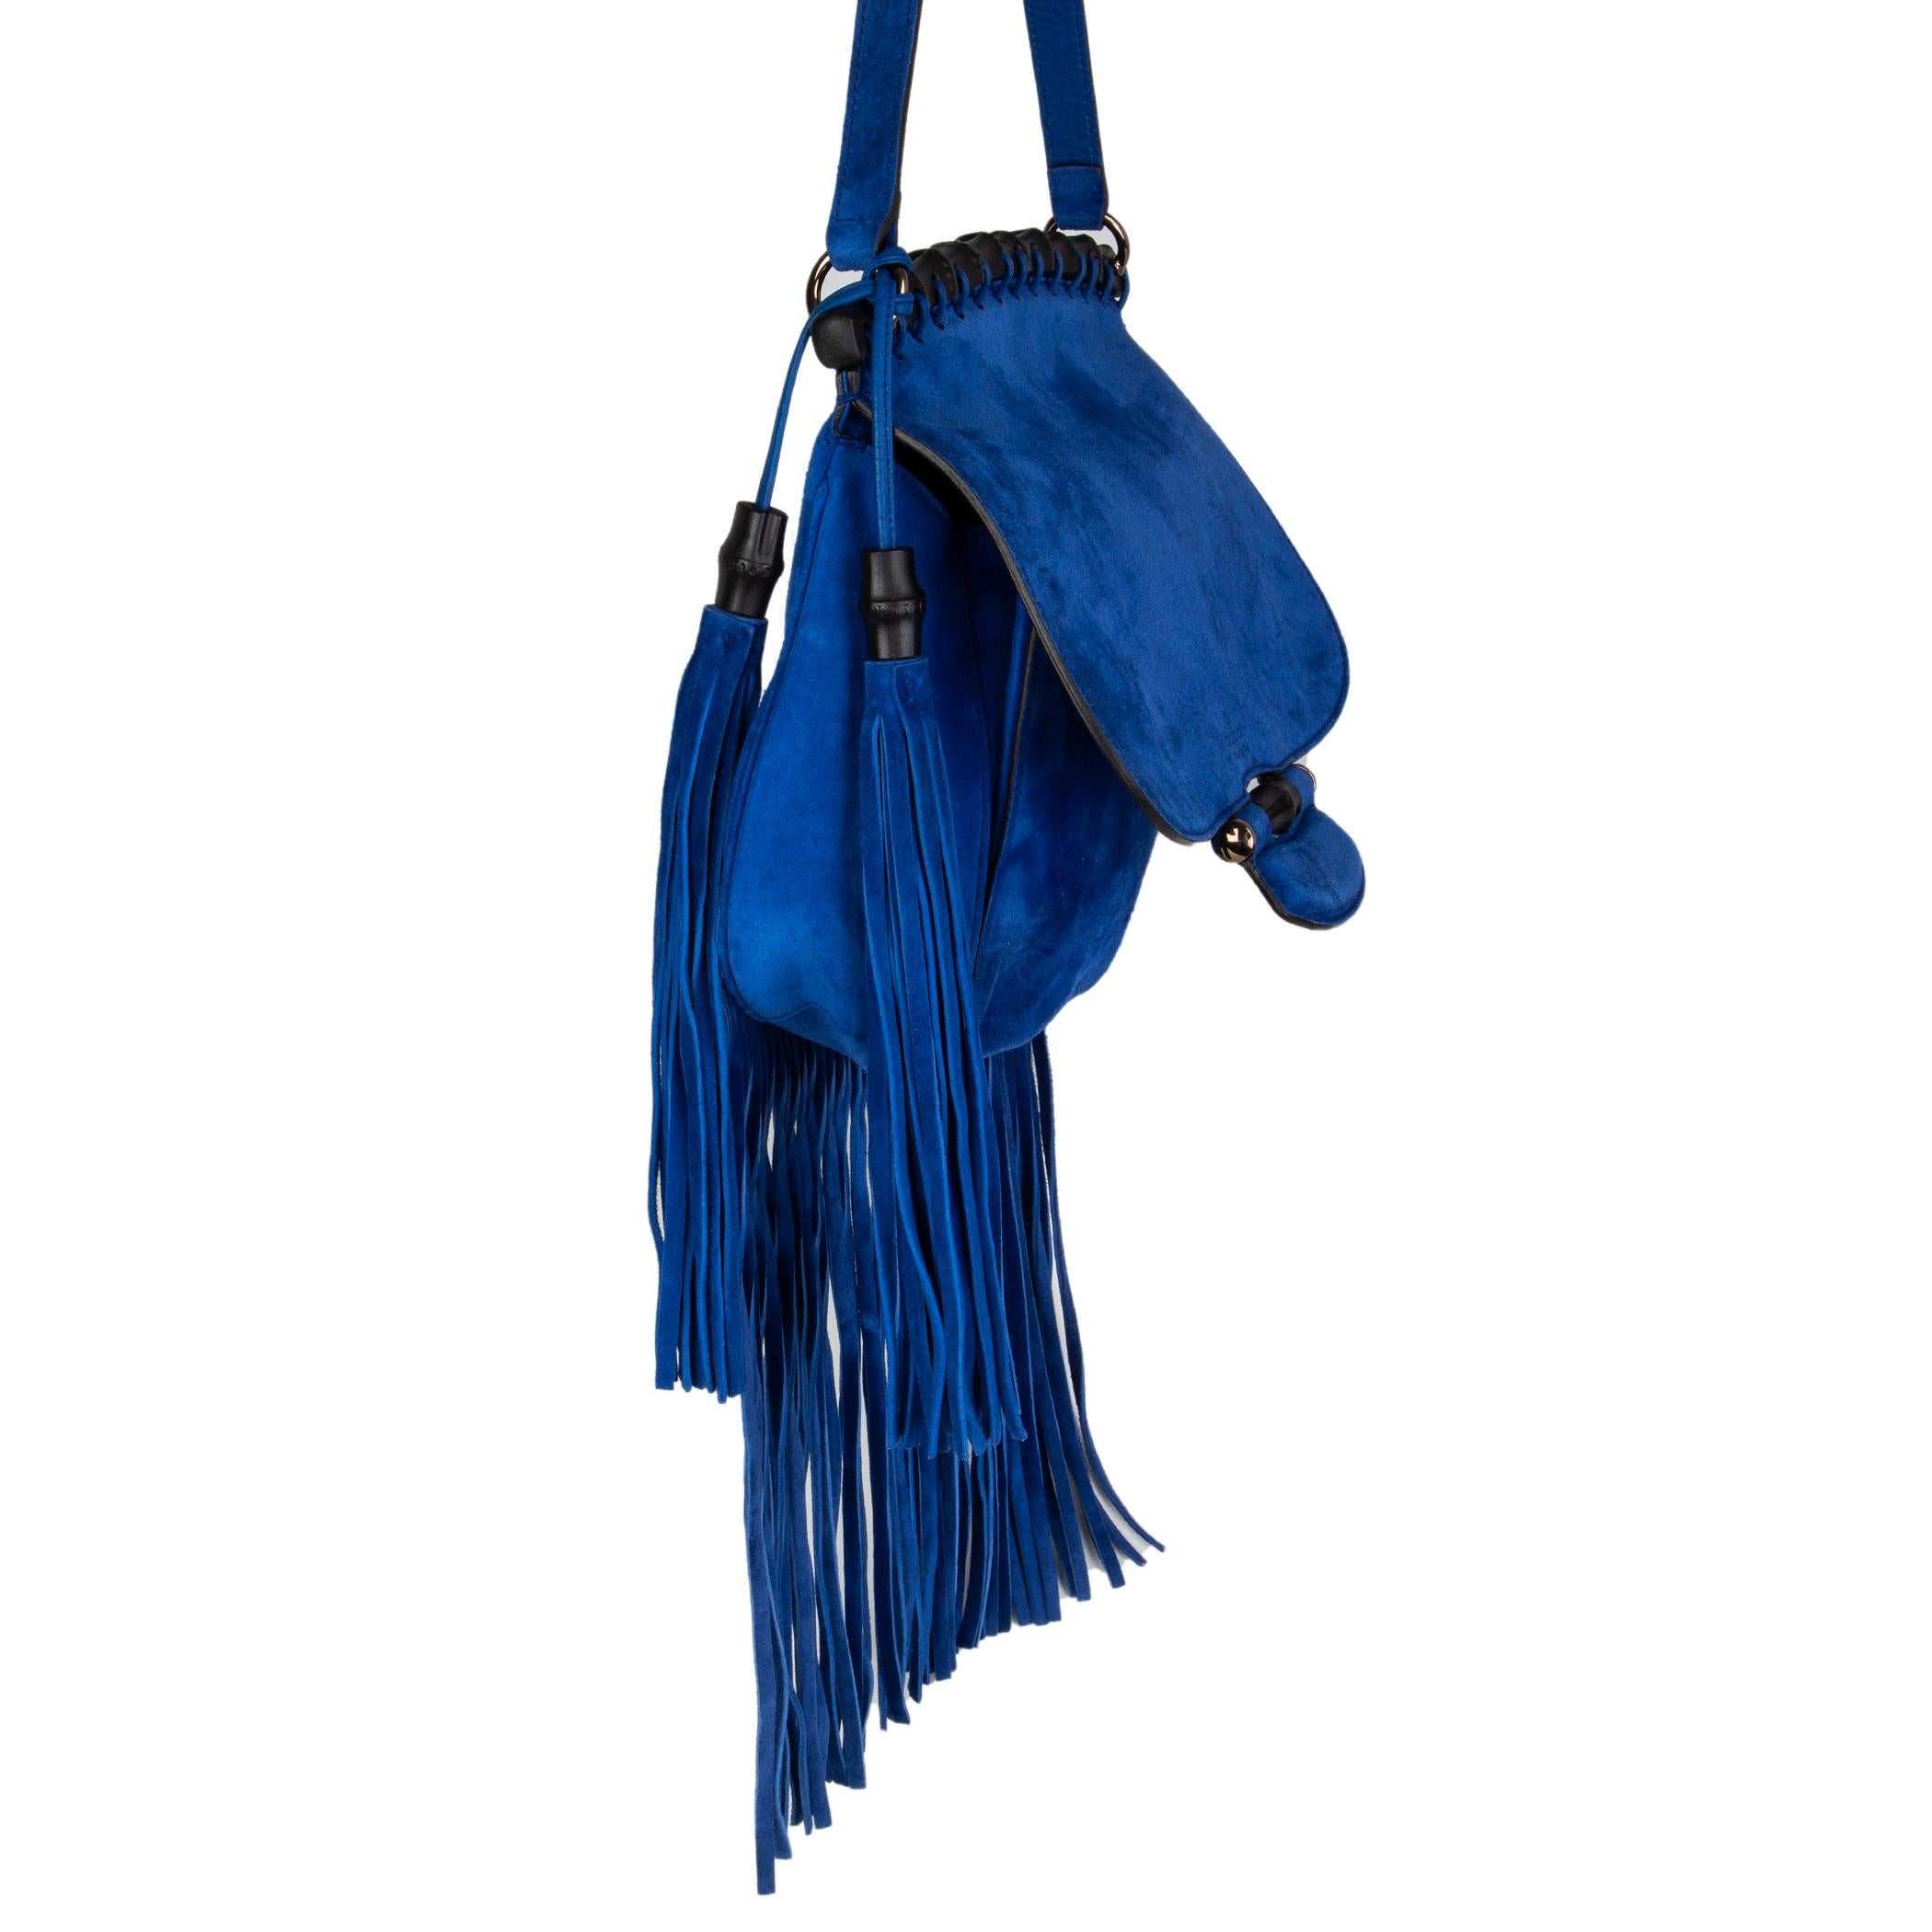 Gucci fringed flap bag in royal-blue suede featuring black bamboo details on the flap and on top part. Lined in blue and tan calfskin with one zip pocket against the back and a button pocket on top. Has been carried and is in excellent condition.